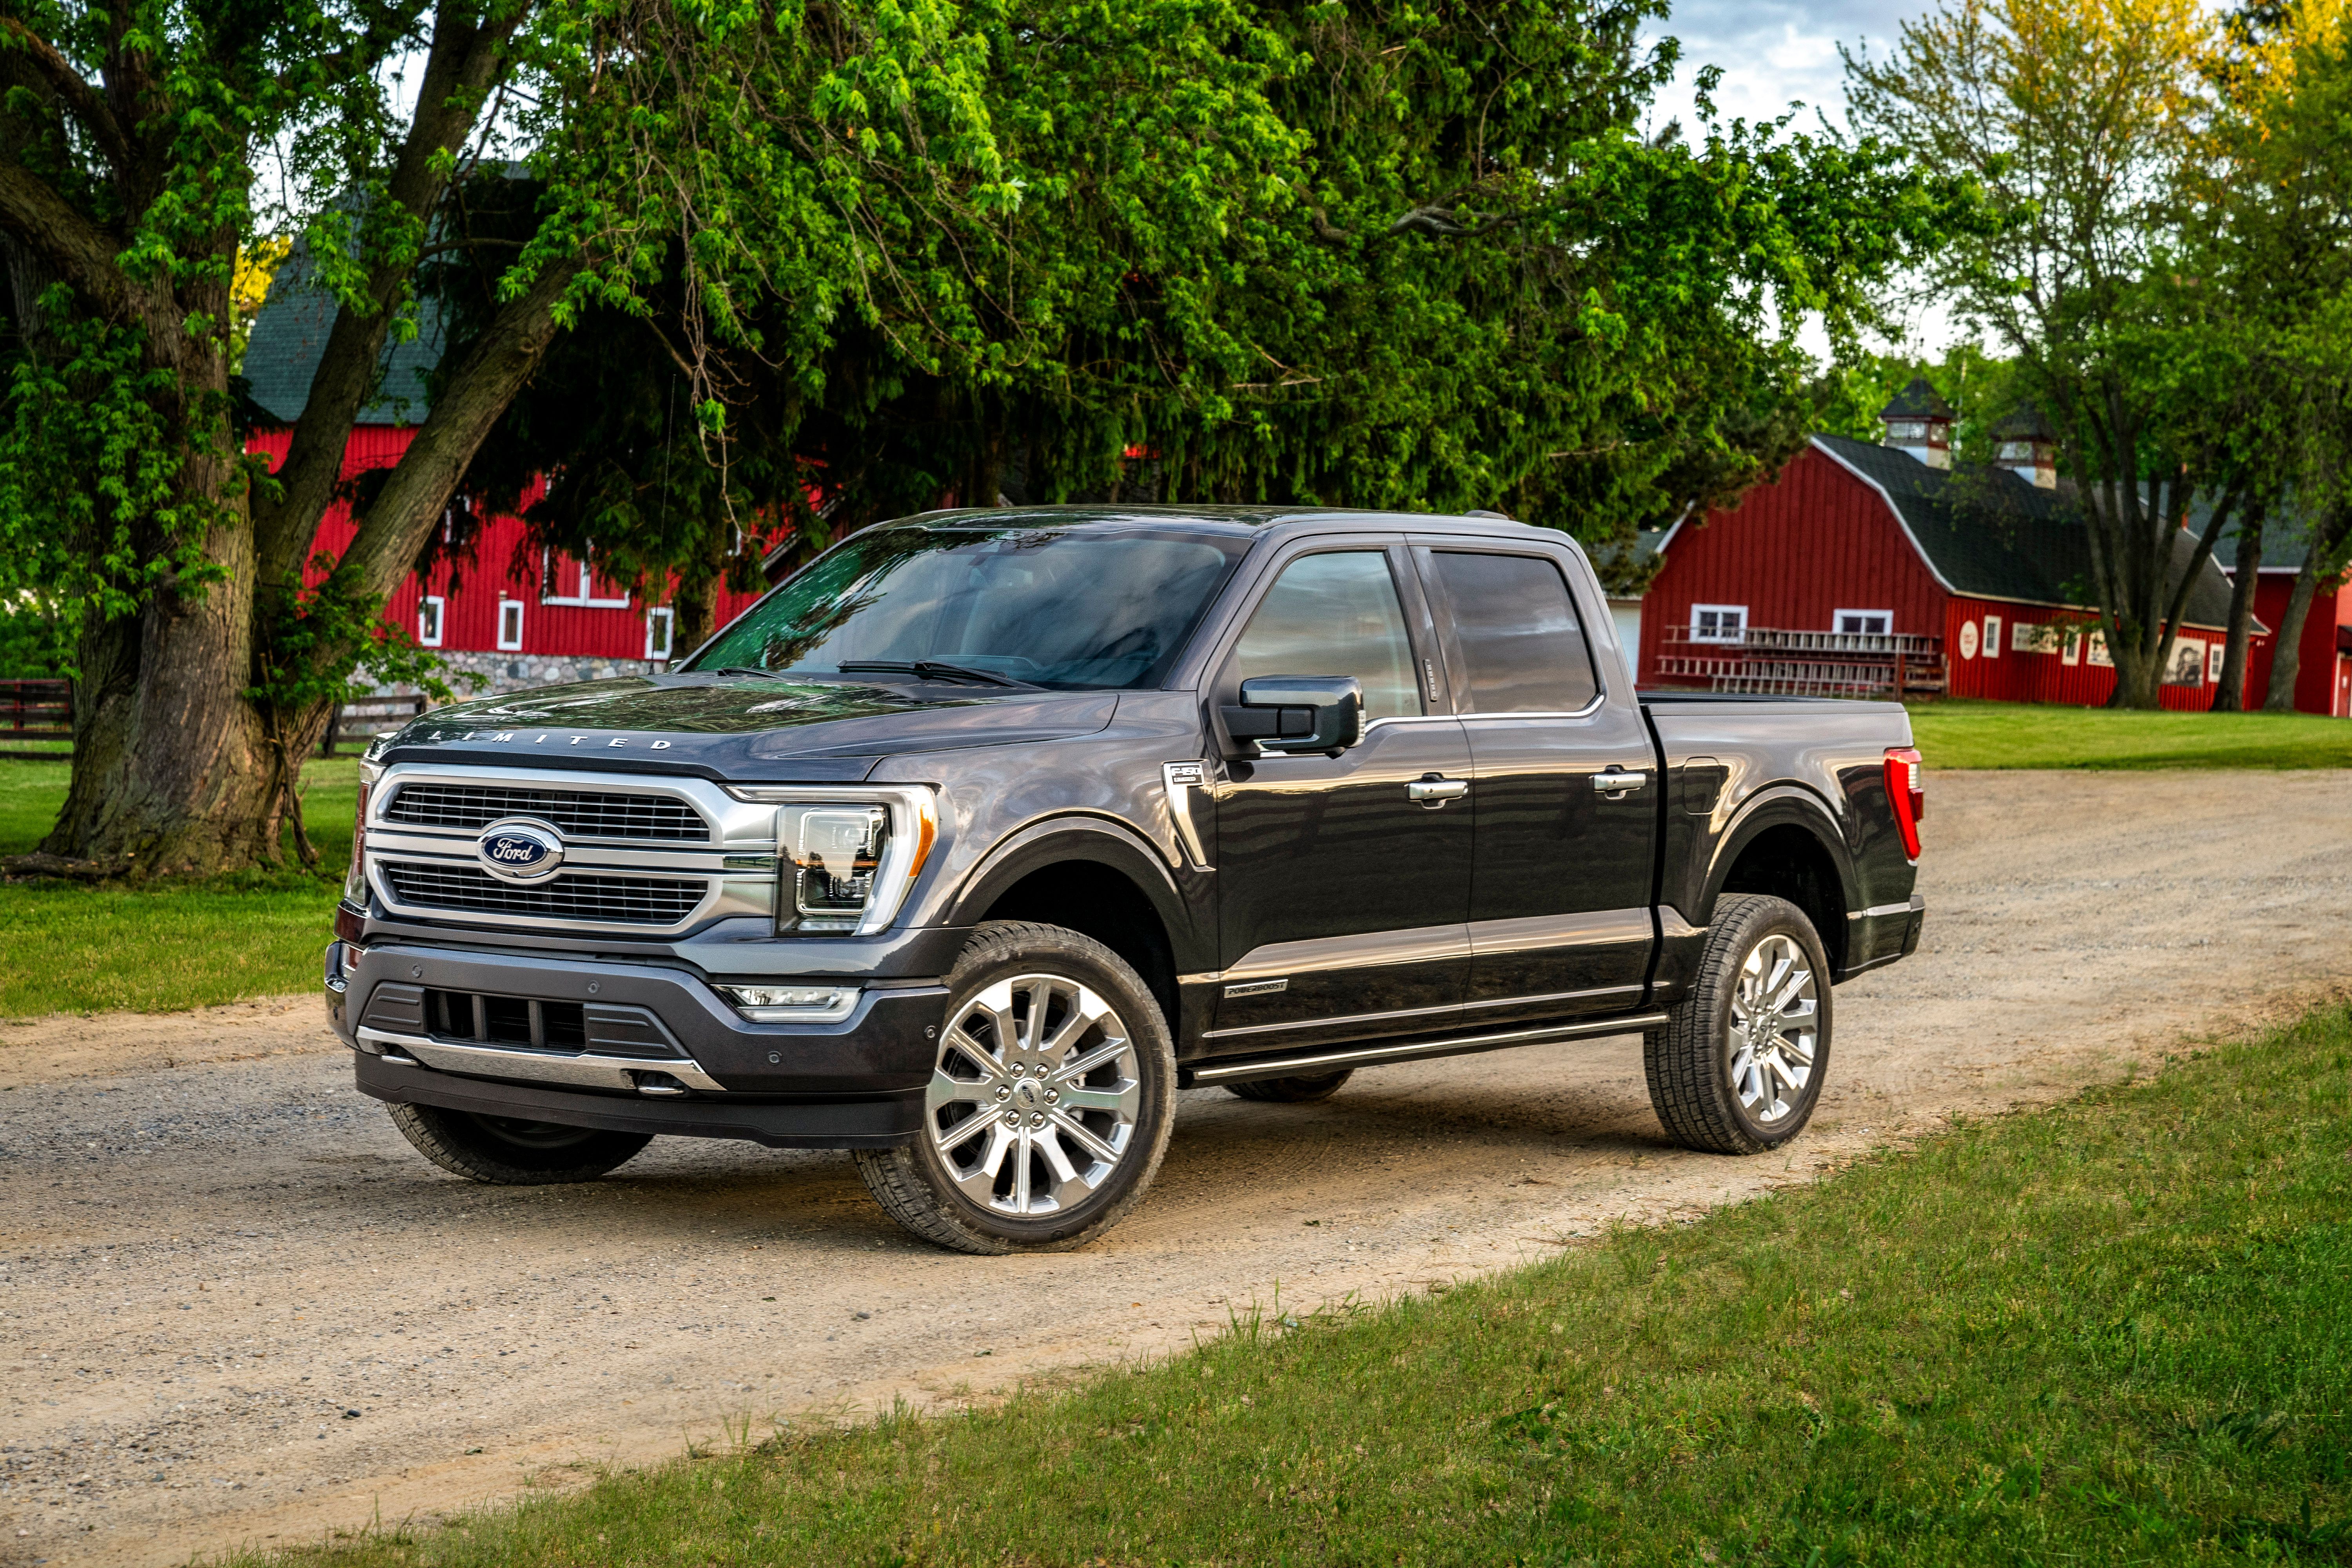 2020 Ford Announces The Power Output Figures For Every Engine Option On The 2021 F-150